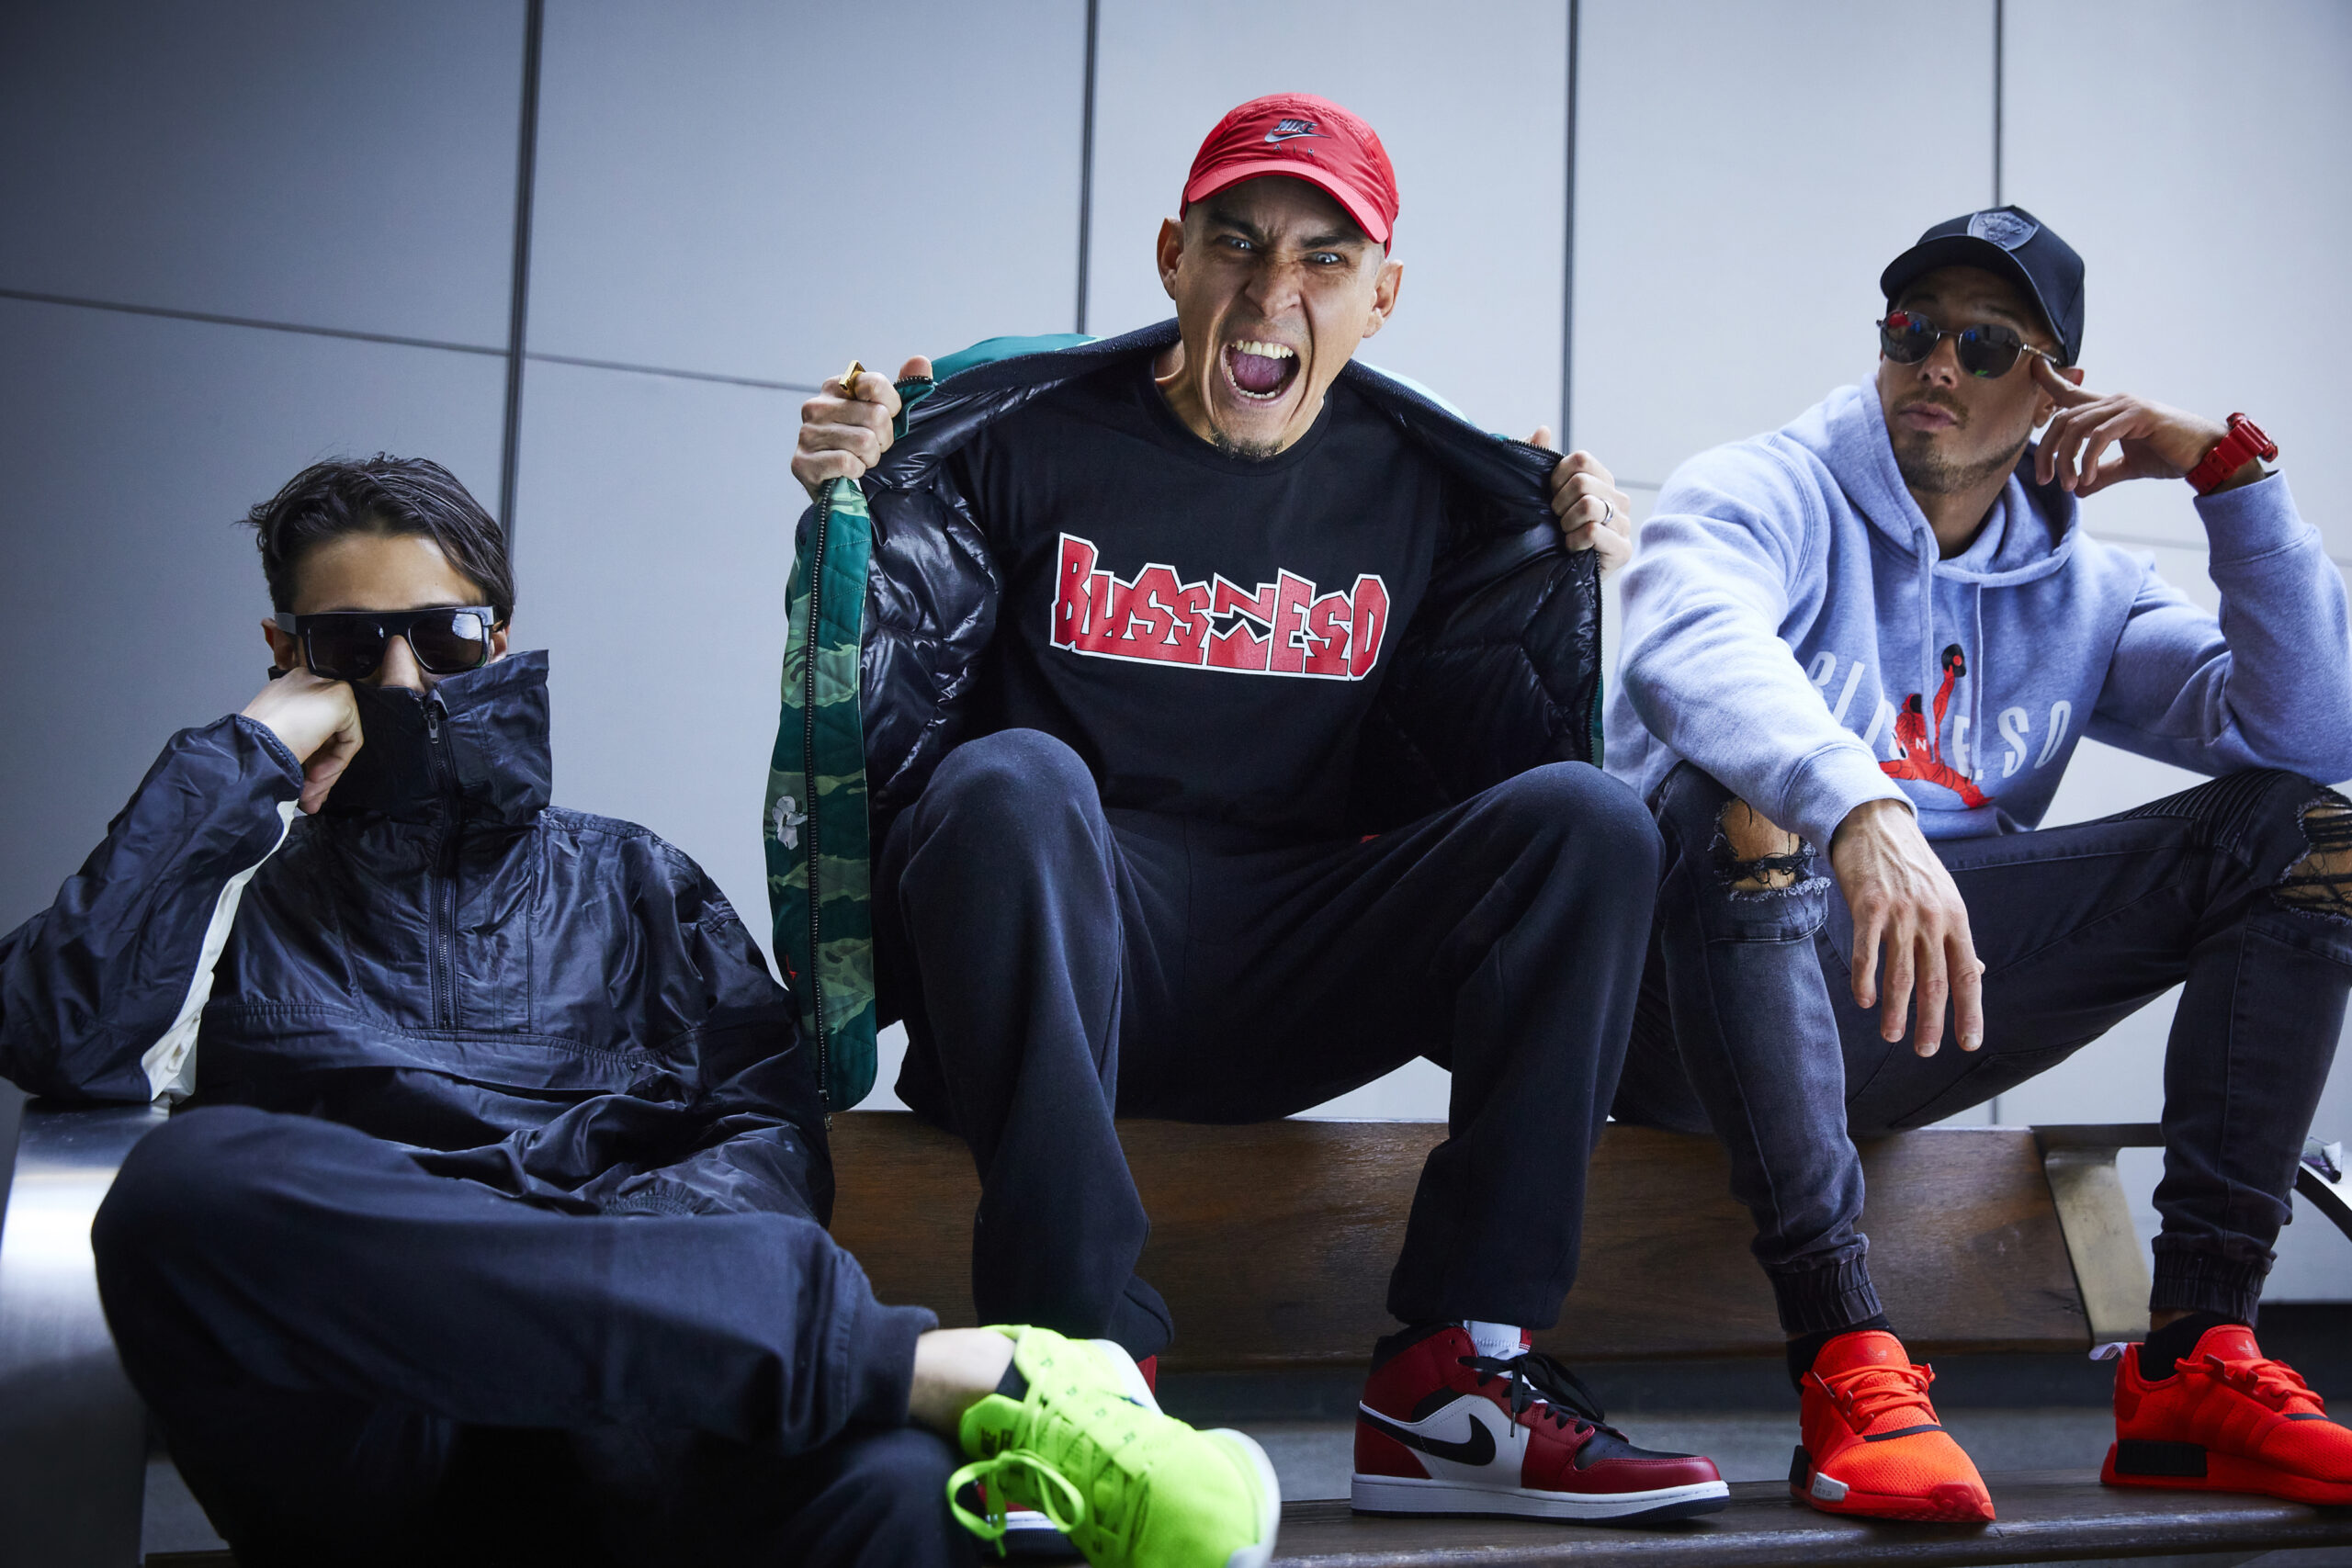 BLISS N ESO RETURN WITH FIRST NEW MUSIC IN THREE YEARS